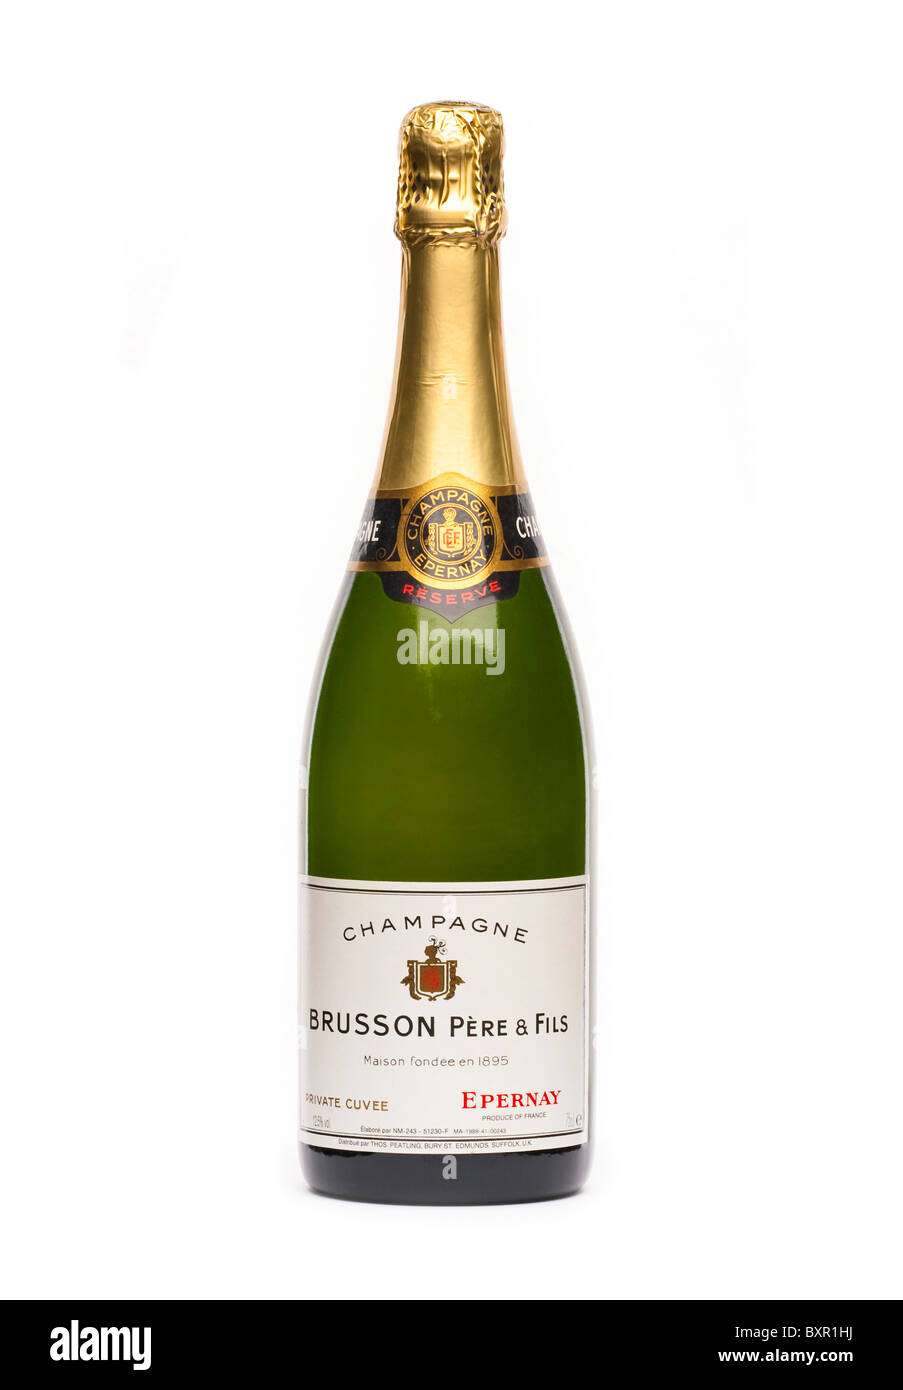 bottle of French Champagne Brusson Pere & Fils Epernay Stock Photo